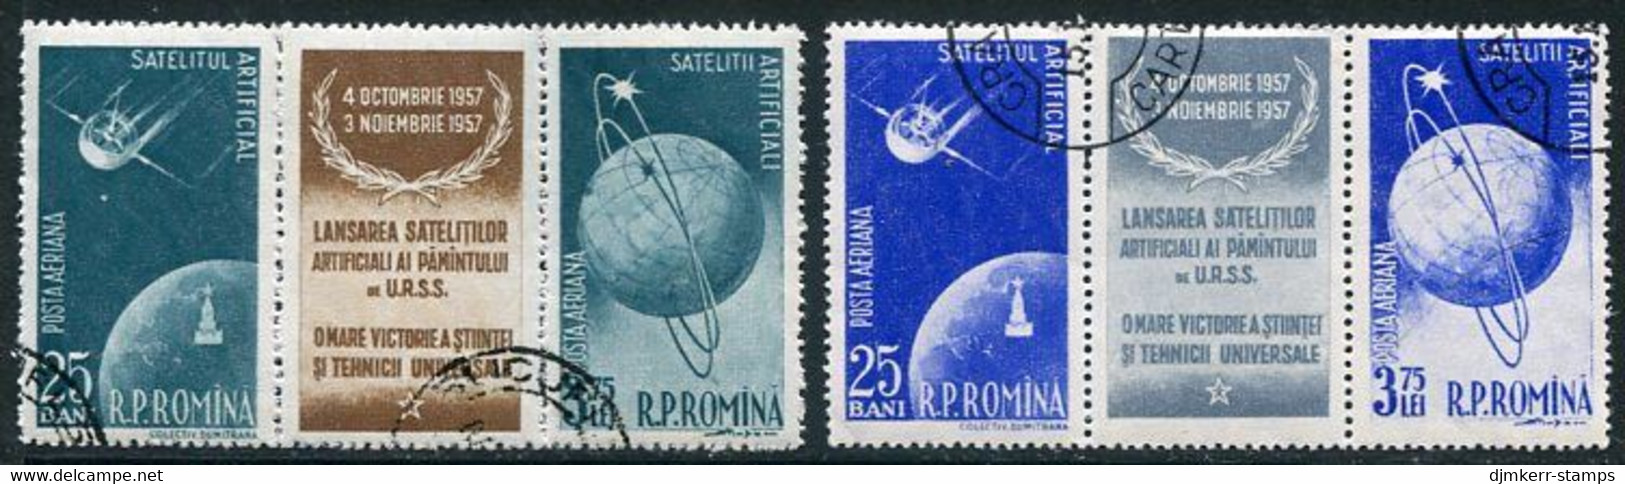 ROMANIA 1957 Launch Of First Earth Satellites Strips Used.  Michel 1677-80 - Used Stamps